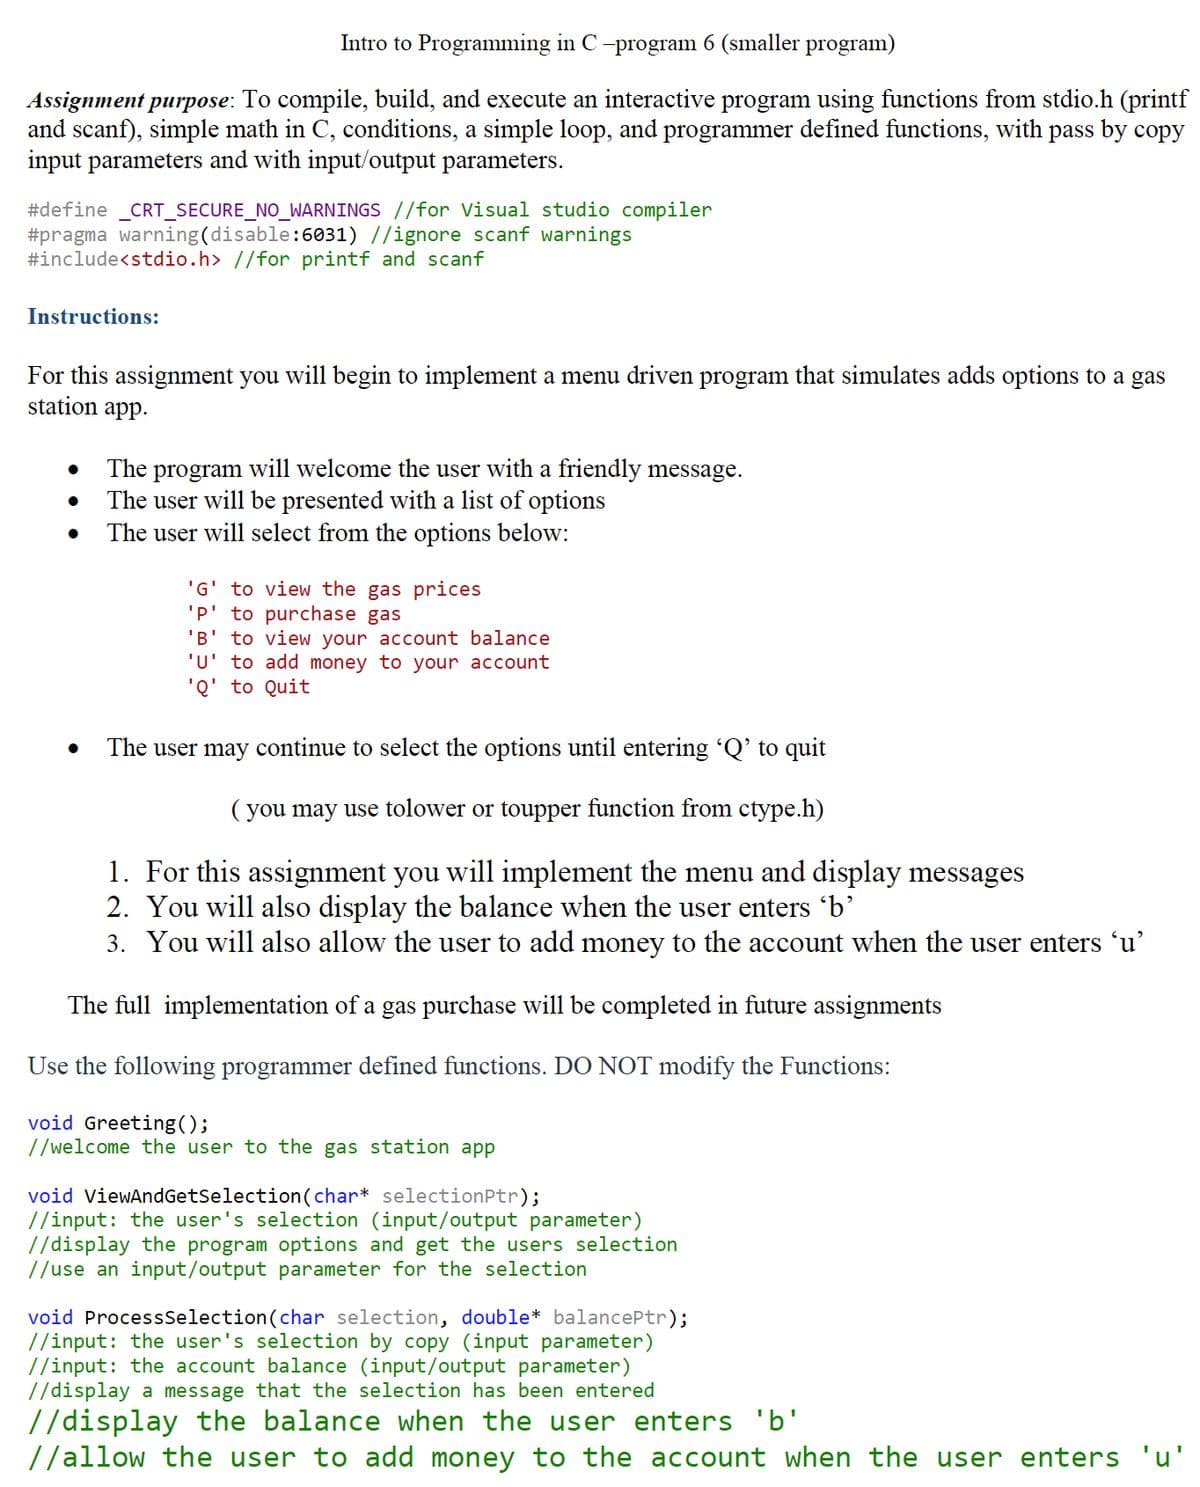 Intro to Programming in C -program 6 (smaller program)
Assignment purpose: To compile, build, and execute an interactive program using functions from stdio.h (printf
and scanf), simple math in C, conditions, a simple loop, and programmer defined functions, with pass by copy
input parameters and with input/output parameters.
#define _CRT_SECURE_NO_WARNINGS //for Visual studio compiler
#pragma warning (disable:6031) //ignore scanf warnings
#include<stdio.h> //for printf and scanf
Instructions:
For this assignment you will begin to implement a menu driven program that simulates adds options to a gas
station app.
The program will welcome the user with a friendly message.
The user will be presented with a list of options
The user will select from the options below:
'G' to view the gas prices
'P' to purchase gas
'B' to view your account balance
'u' to add money to your account
'Q' to Quit
The user may continue to select the options until entering 'Q' to quit
( you may use tolower or toupper function from ctype.h)
1. For this assignment you will implement the menu and display messages
2. You will also display the balance when the user enters 'b'
3. You will also allow the user to add money to the account when the user enters 'u’
The full implementation of a gas purchase will be completed in future assignments
Use the following programmer defined functions. DO NOT modify the Functions:
void Greeting();
//welcome the user to the gas station app
void ViewAndGetSelection(char* selectionPtr);
//input: the user's selection (input/output parameter)
//display the program options and get the users selection
//use an input/output parameter for the selection
void ProcessSelection(char selection, double* balancePtr);
//input: the user's selection by copy (input parameter)
//input: the account balance (input/output parameter)
//display a message that the selection has been entered
//display the balance when the user enters 'b'
//allow the user to add money to the account when the user enters 'u'
